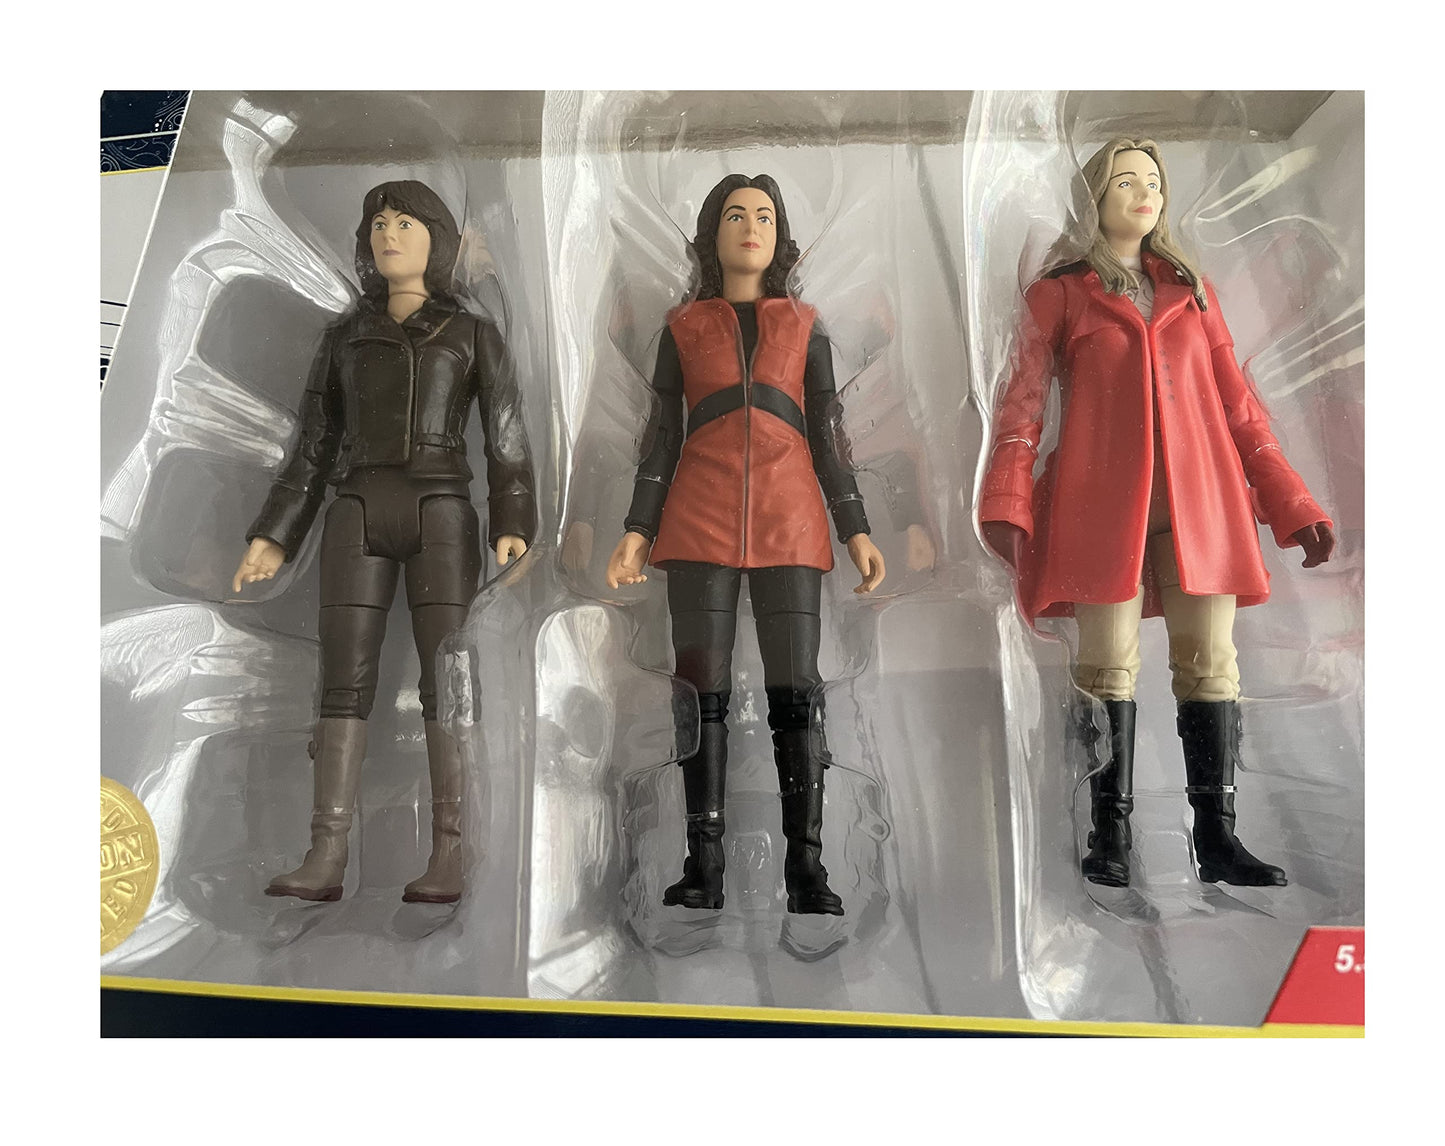 Dr Doctor Who Companions Of The Third & Fourth Doctor Collector Action Figure set - Brand New Factory Sealed.